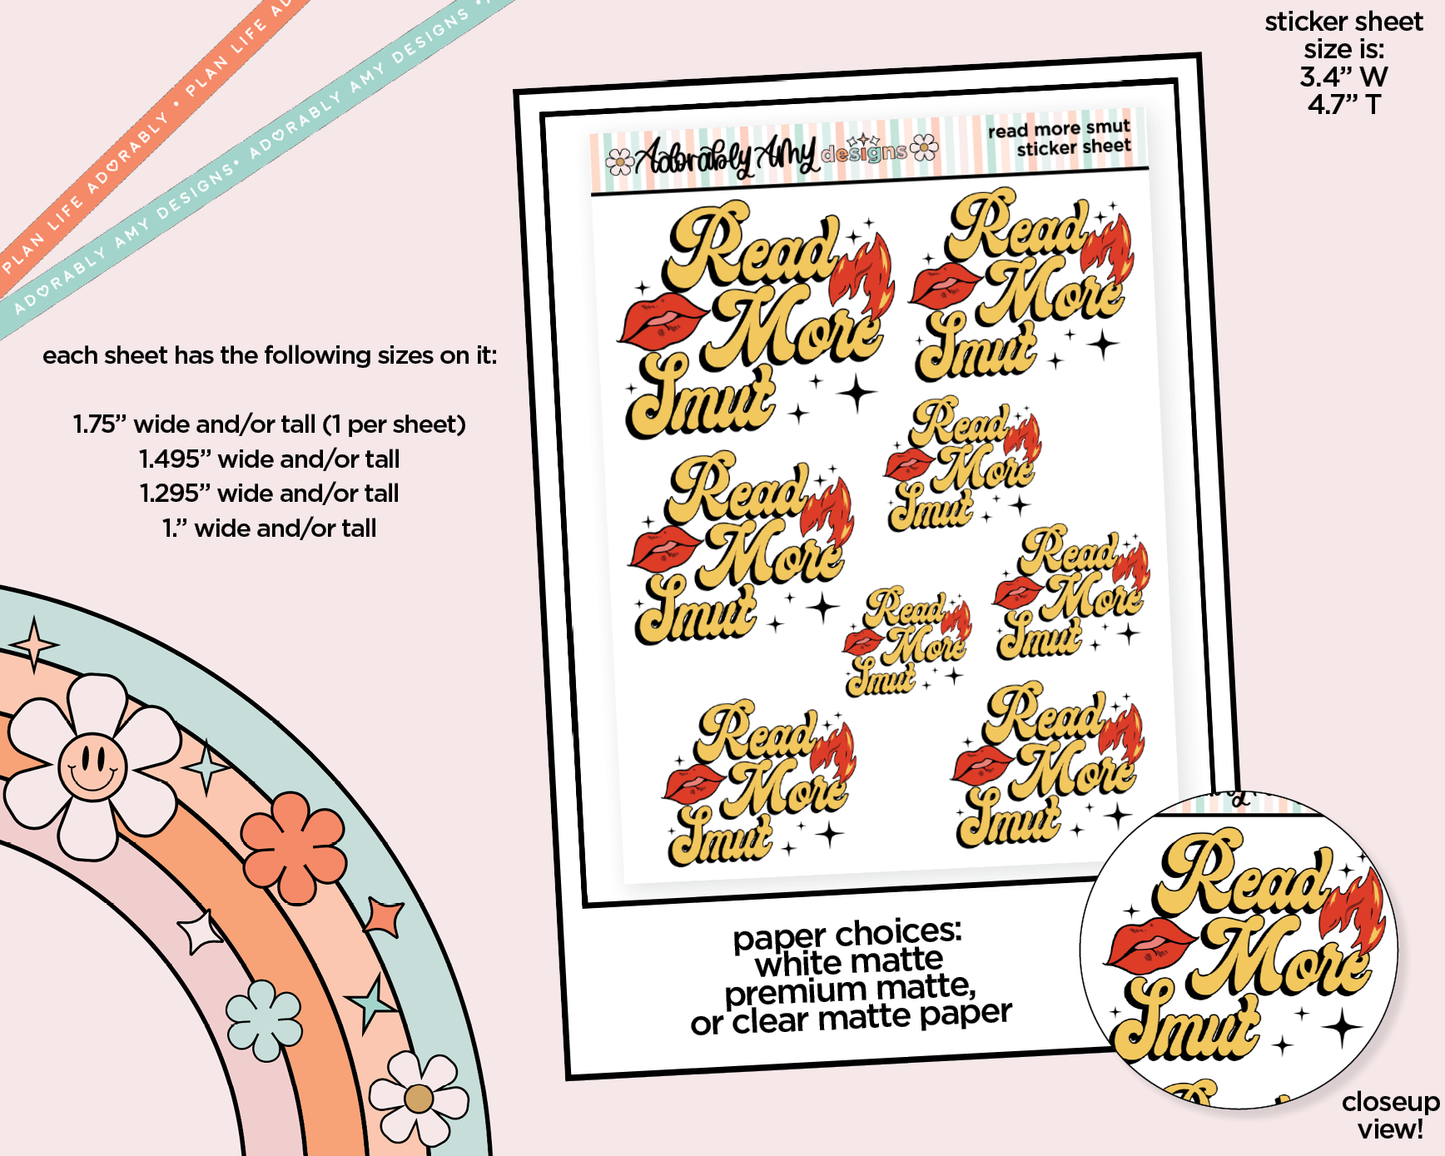 Read More Smut Sampler Planner Stickers for any Planner or Insert